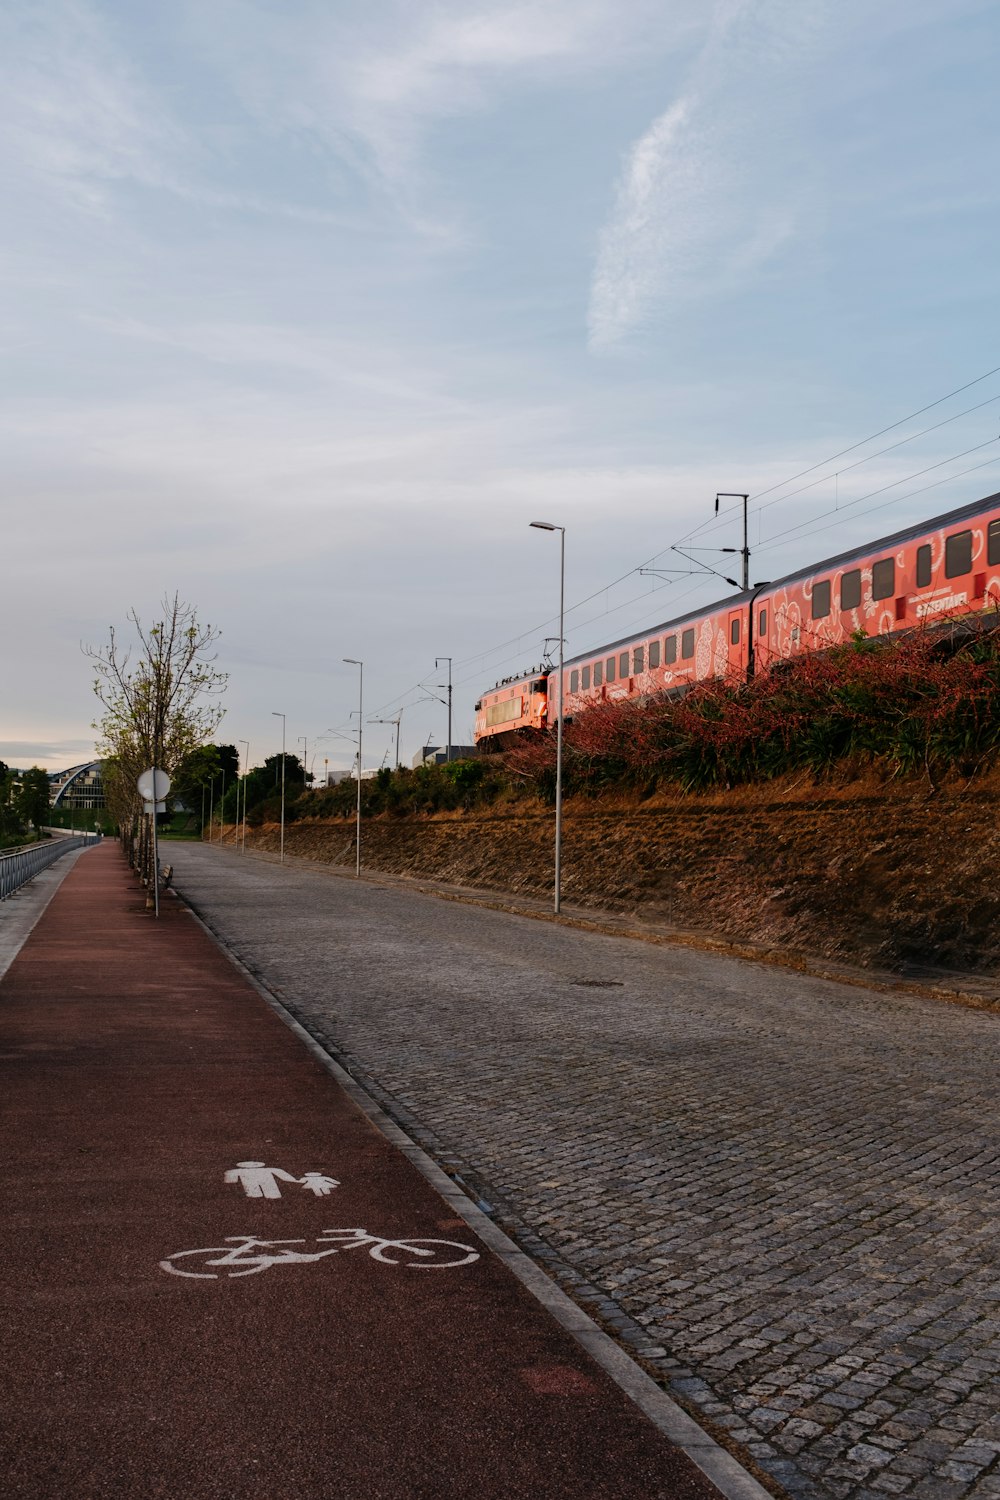 a red train traveling down train tracks next to a road